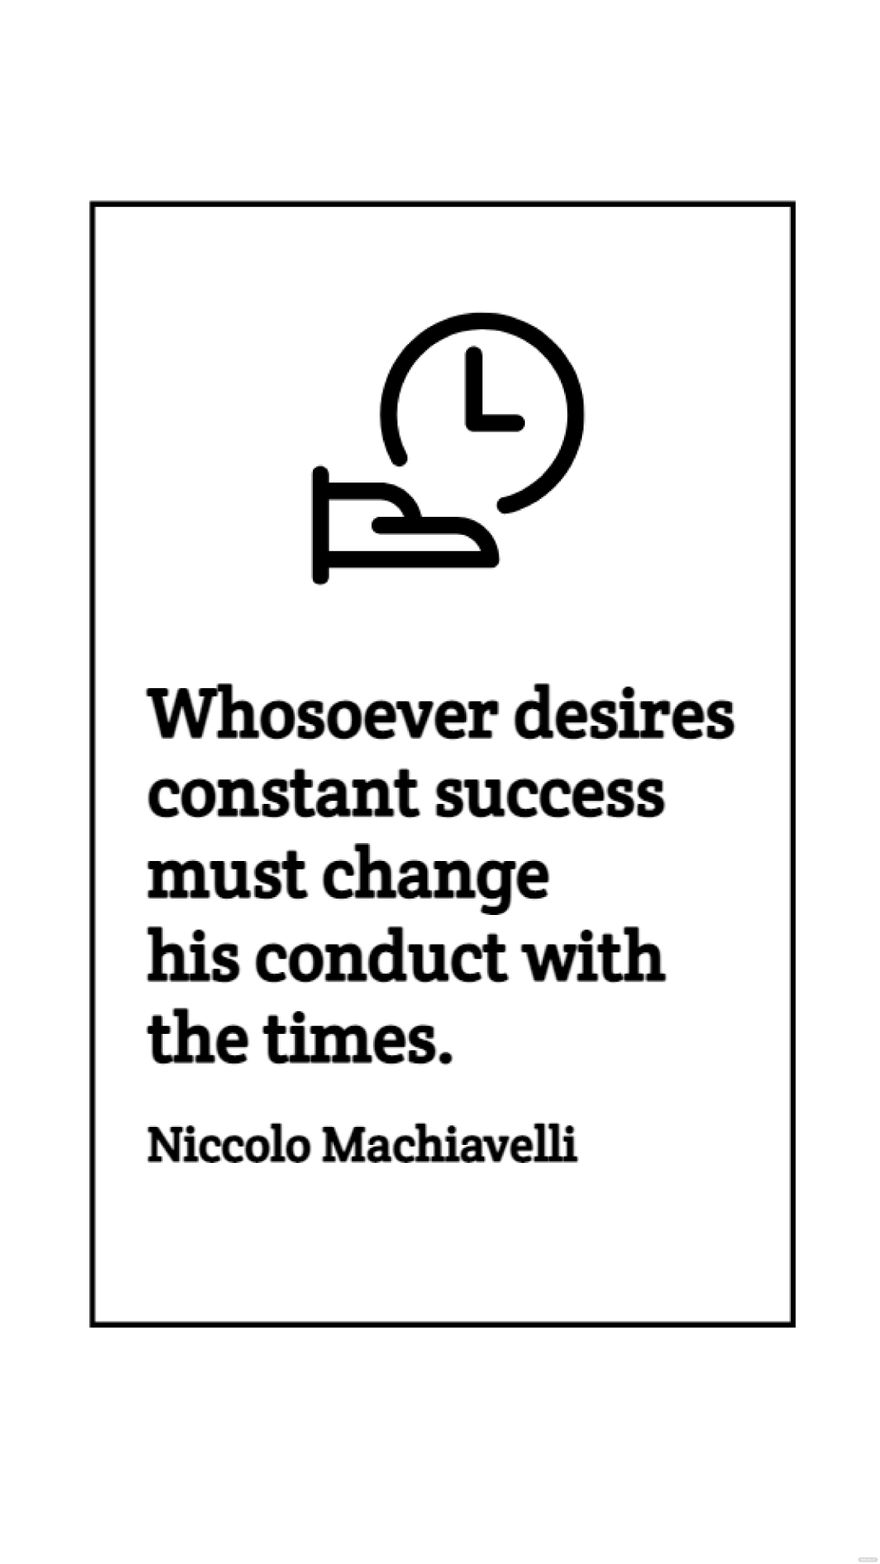 Free Niccolo Machiavelli - Whosoever desires constant success must change his conduct with the times.